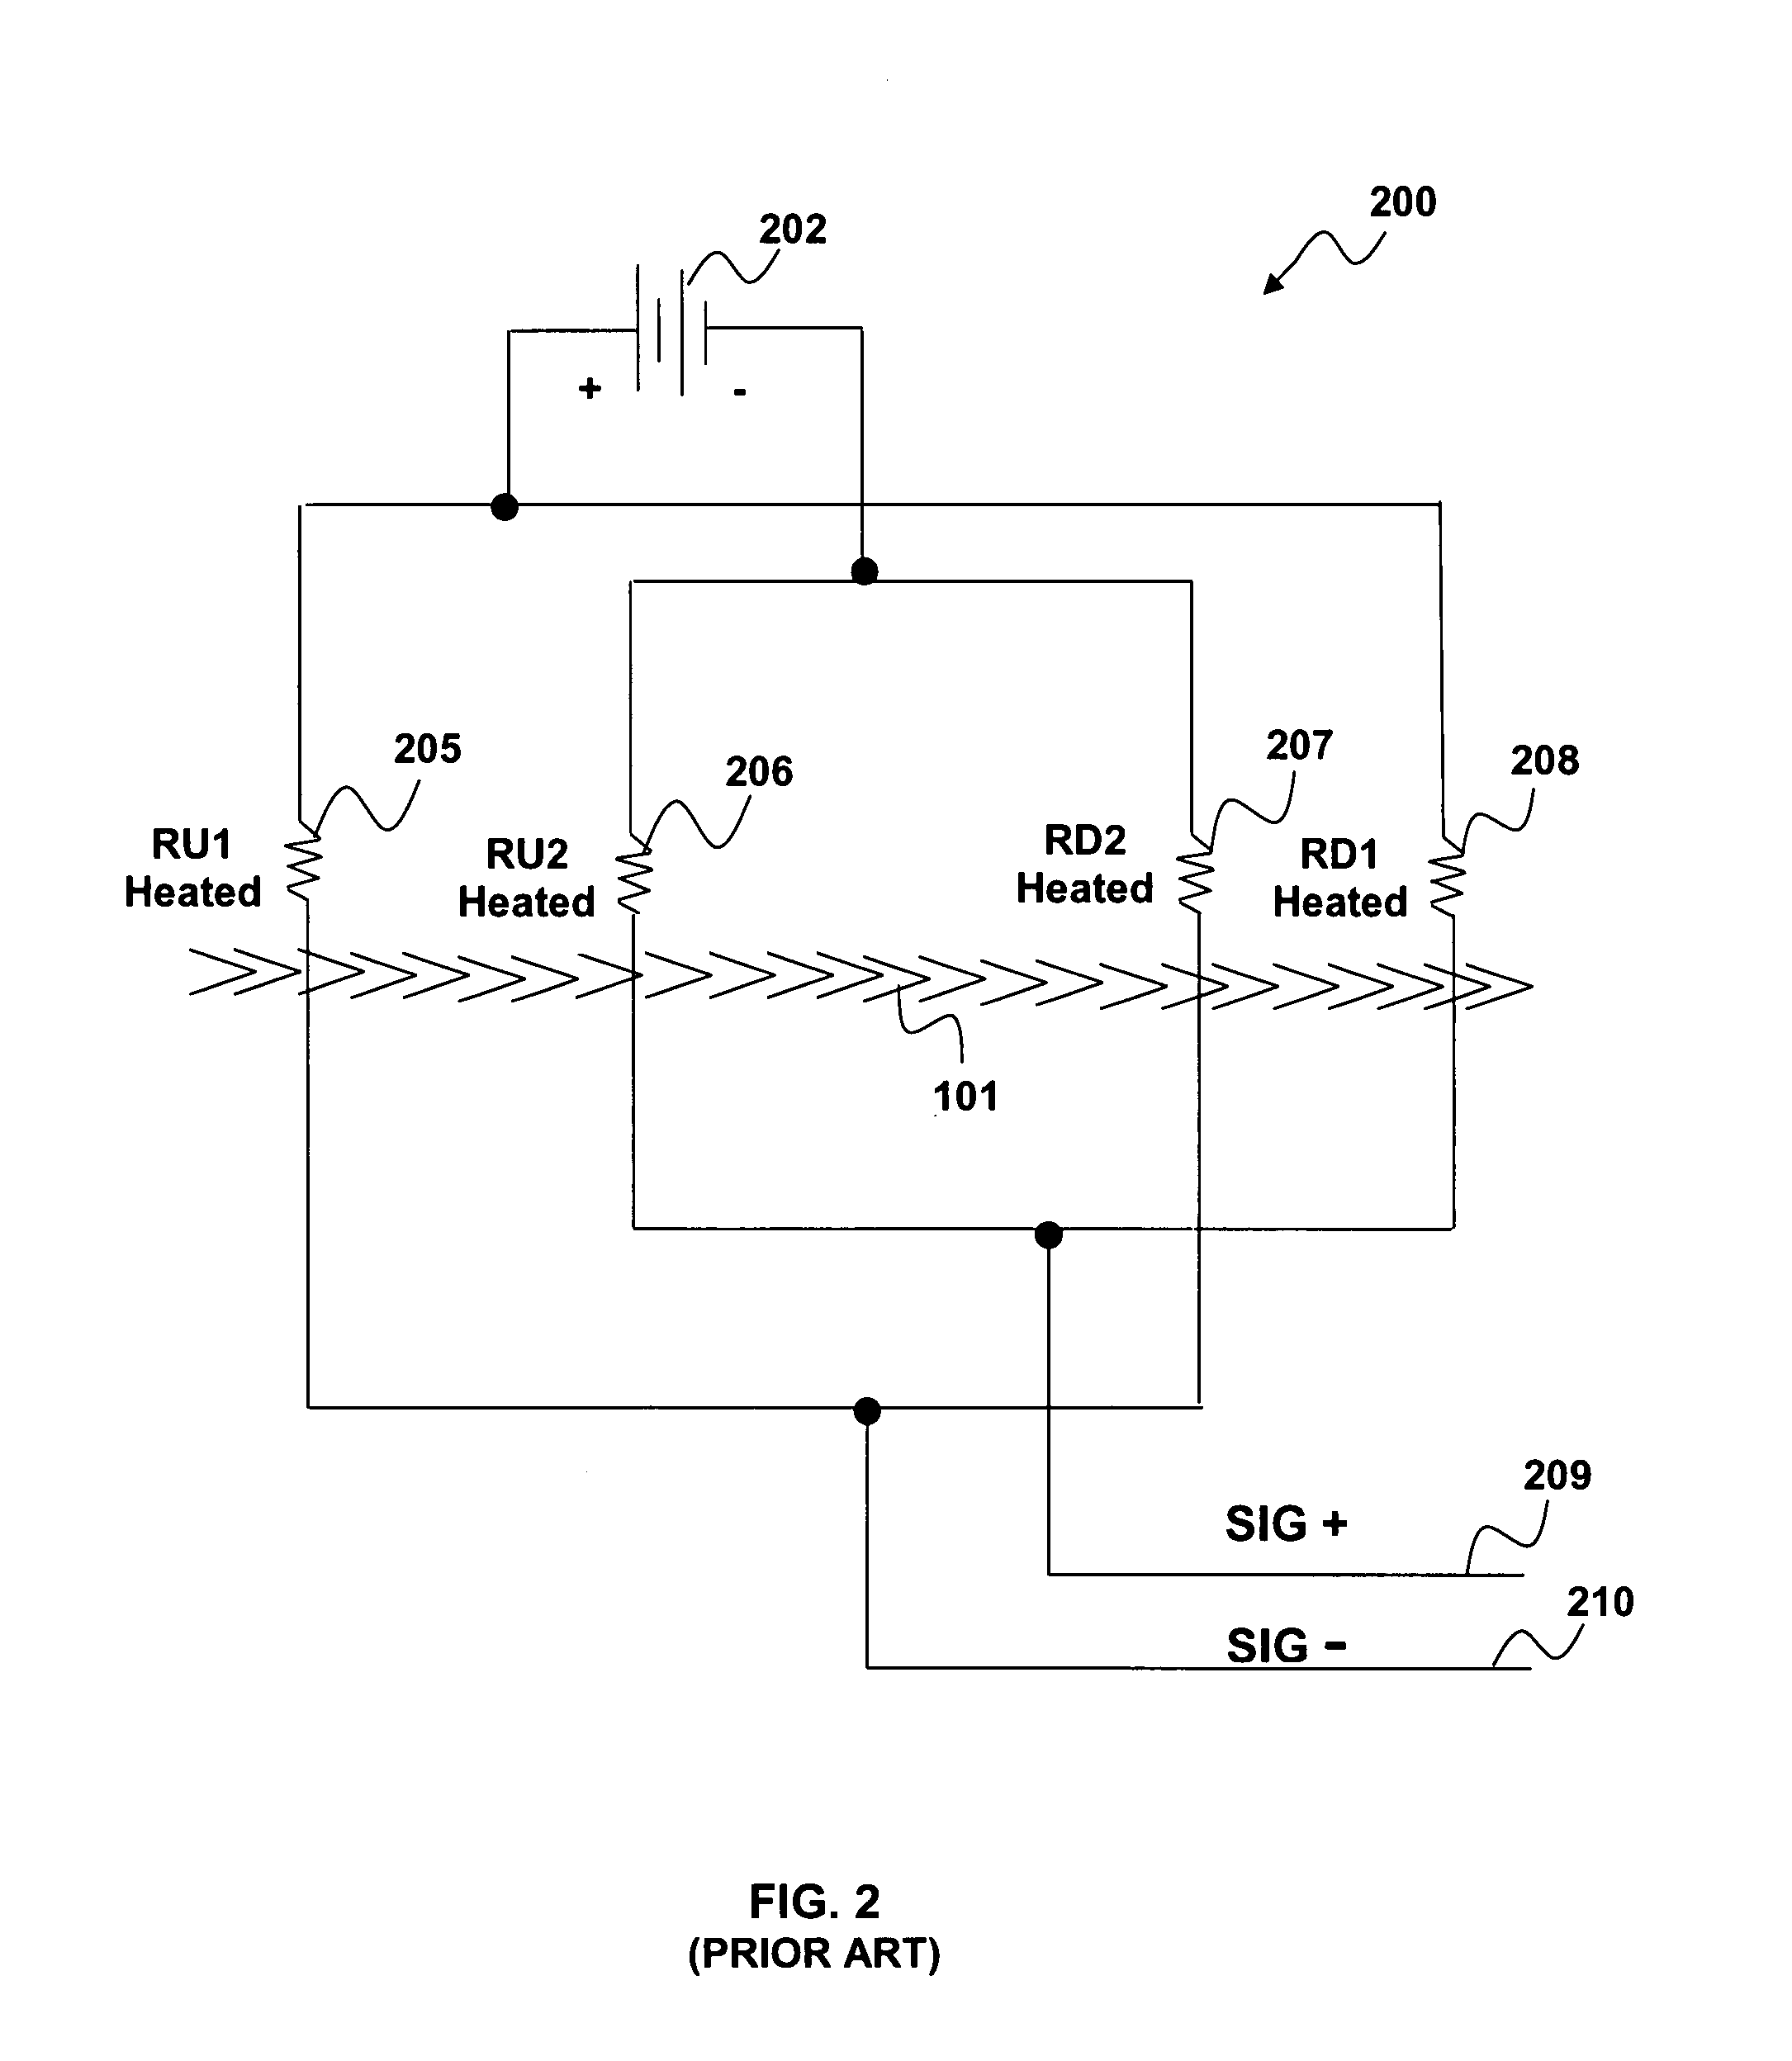 Mass airflow sensing system including resistive temperature sensors and a heating element